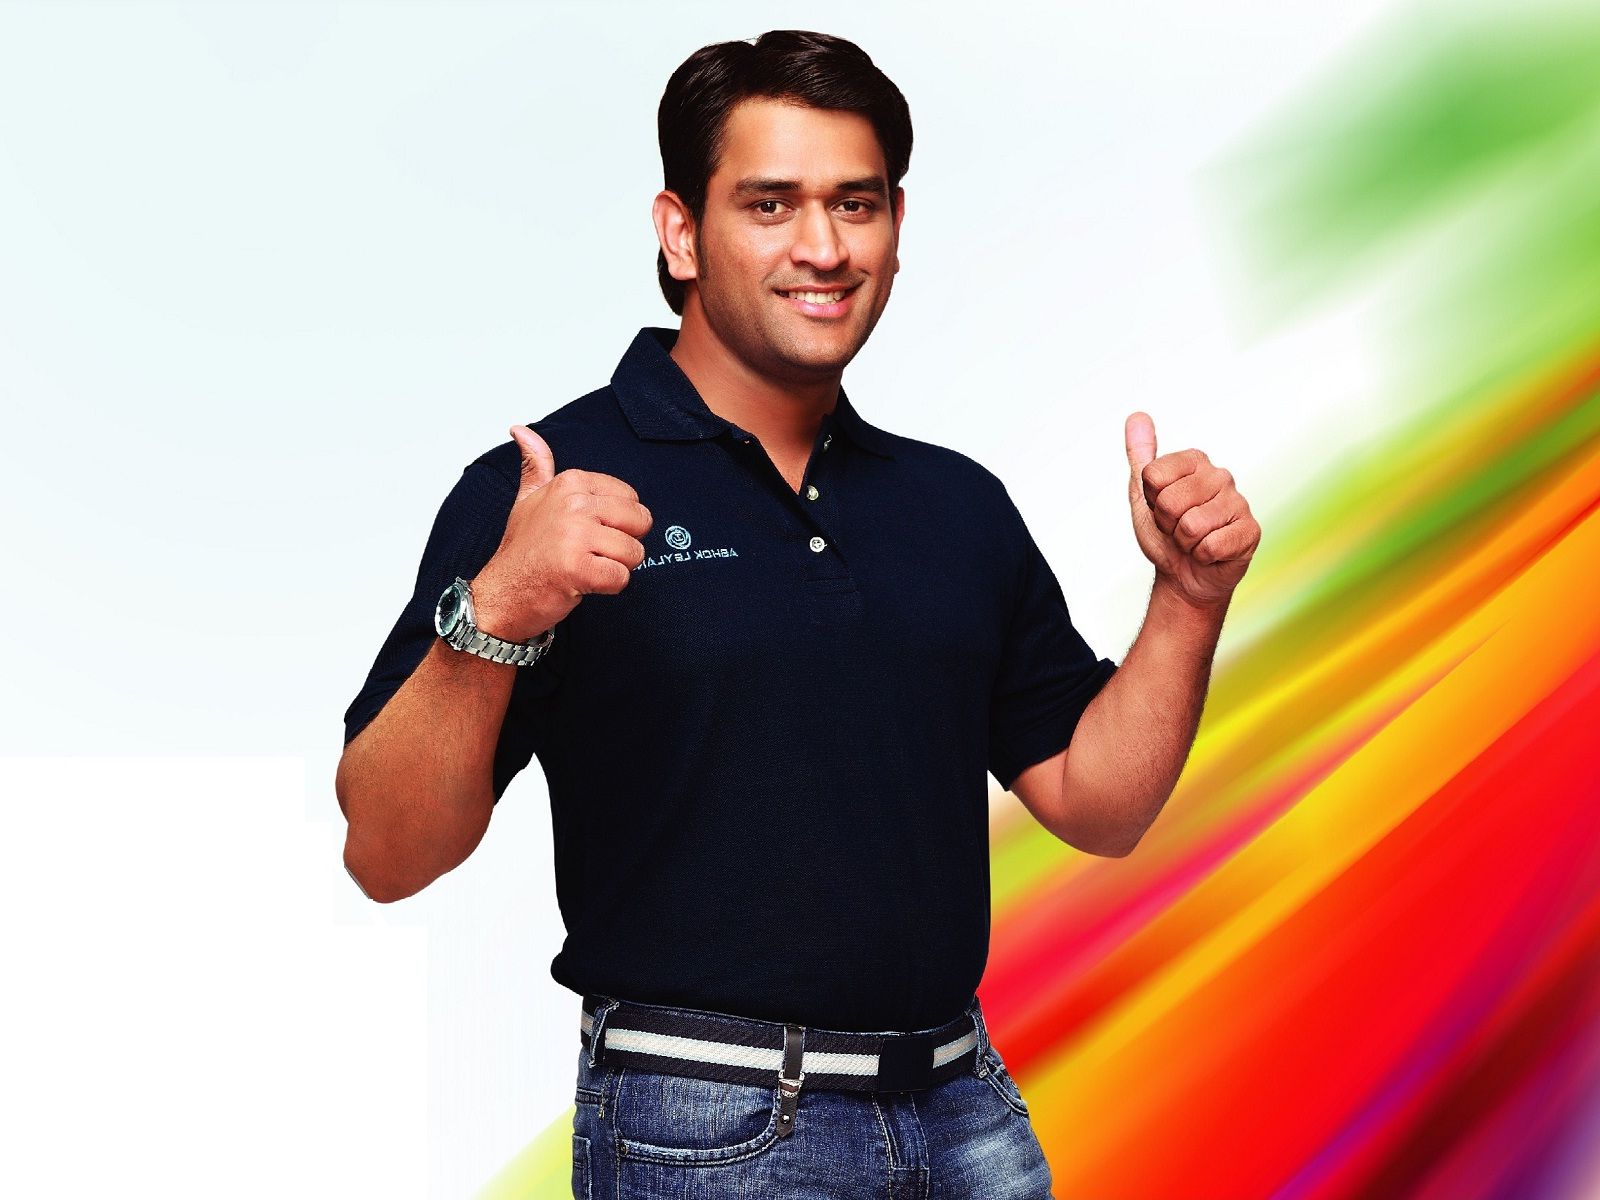 M S Dhoni Indian cricketer handsome looks | HD Wallpapers Rocks